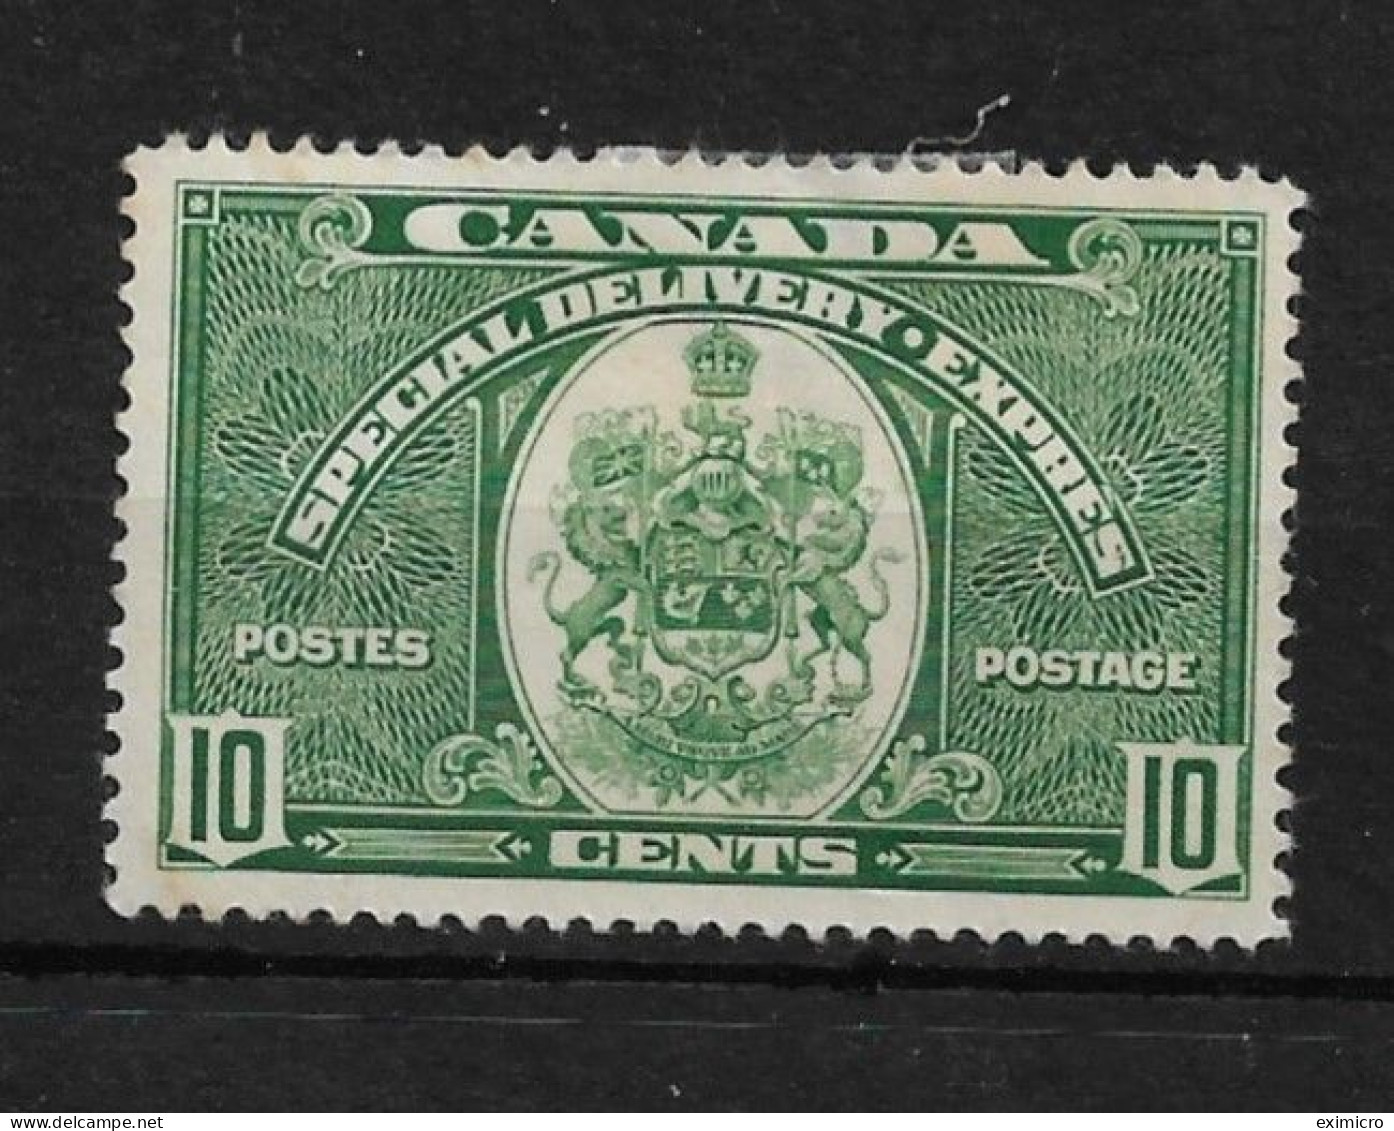 CANADA 1939 10c SPECIAL DELIVERY SG S9 MOUNTED MINT Cat £24 - Express